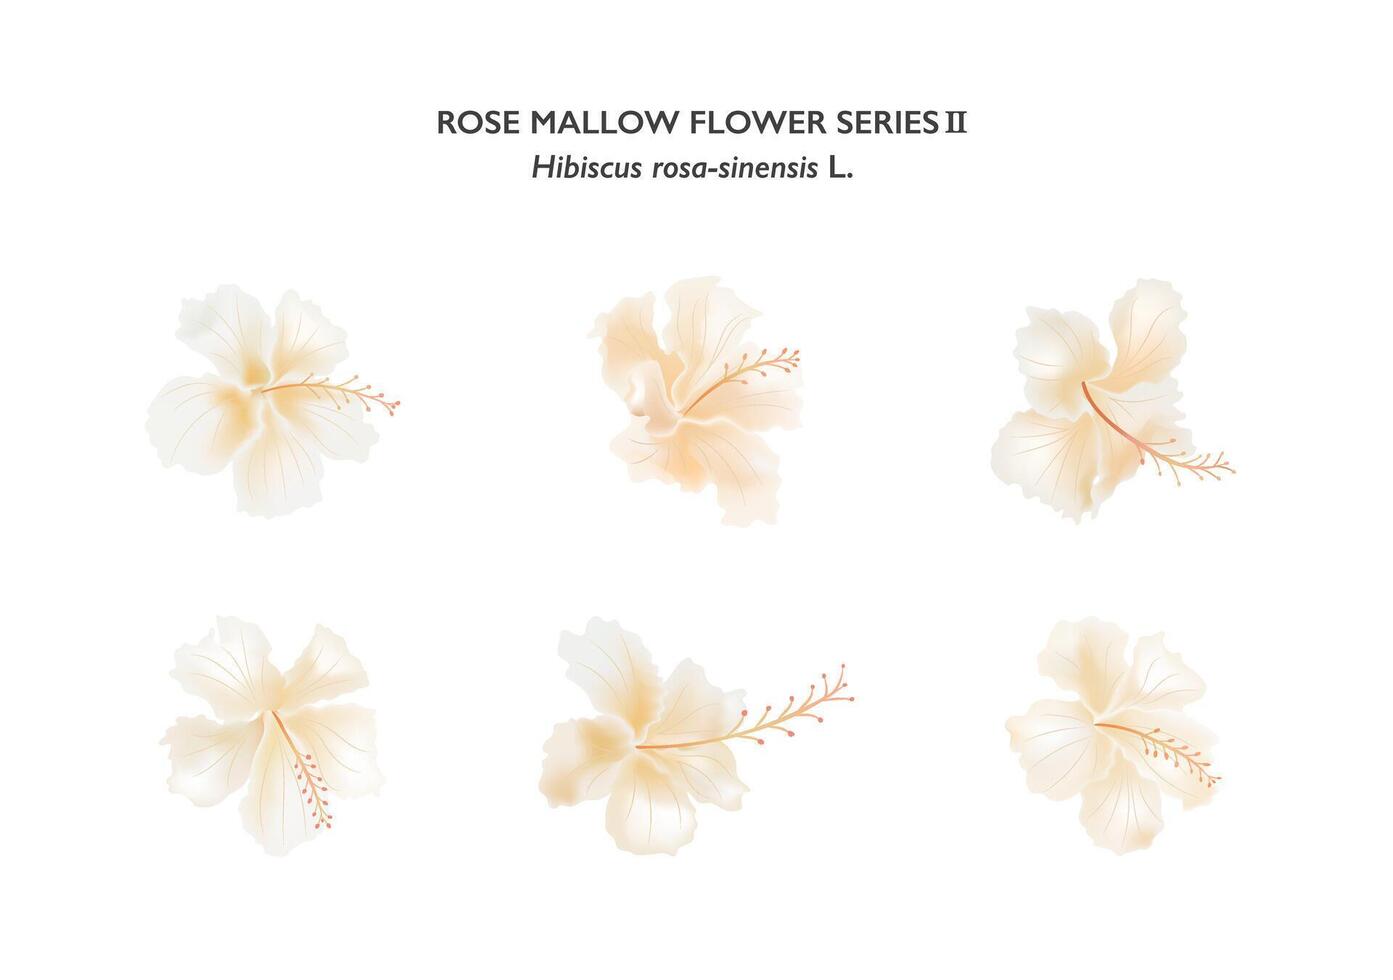 light pink rose mallow flower isolate on background series05 vector